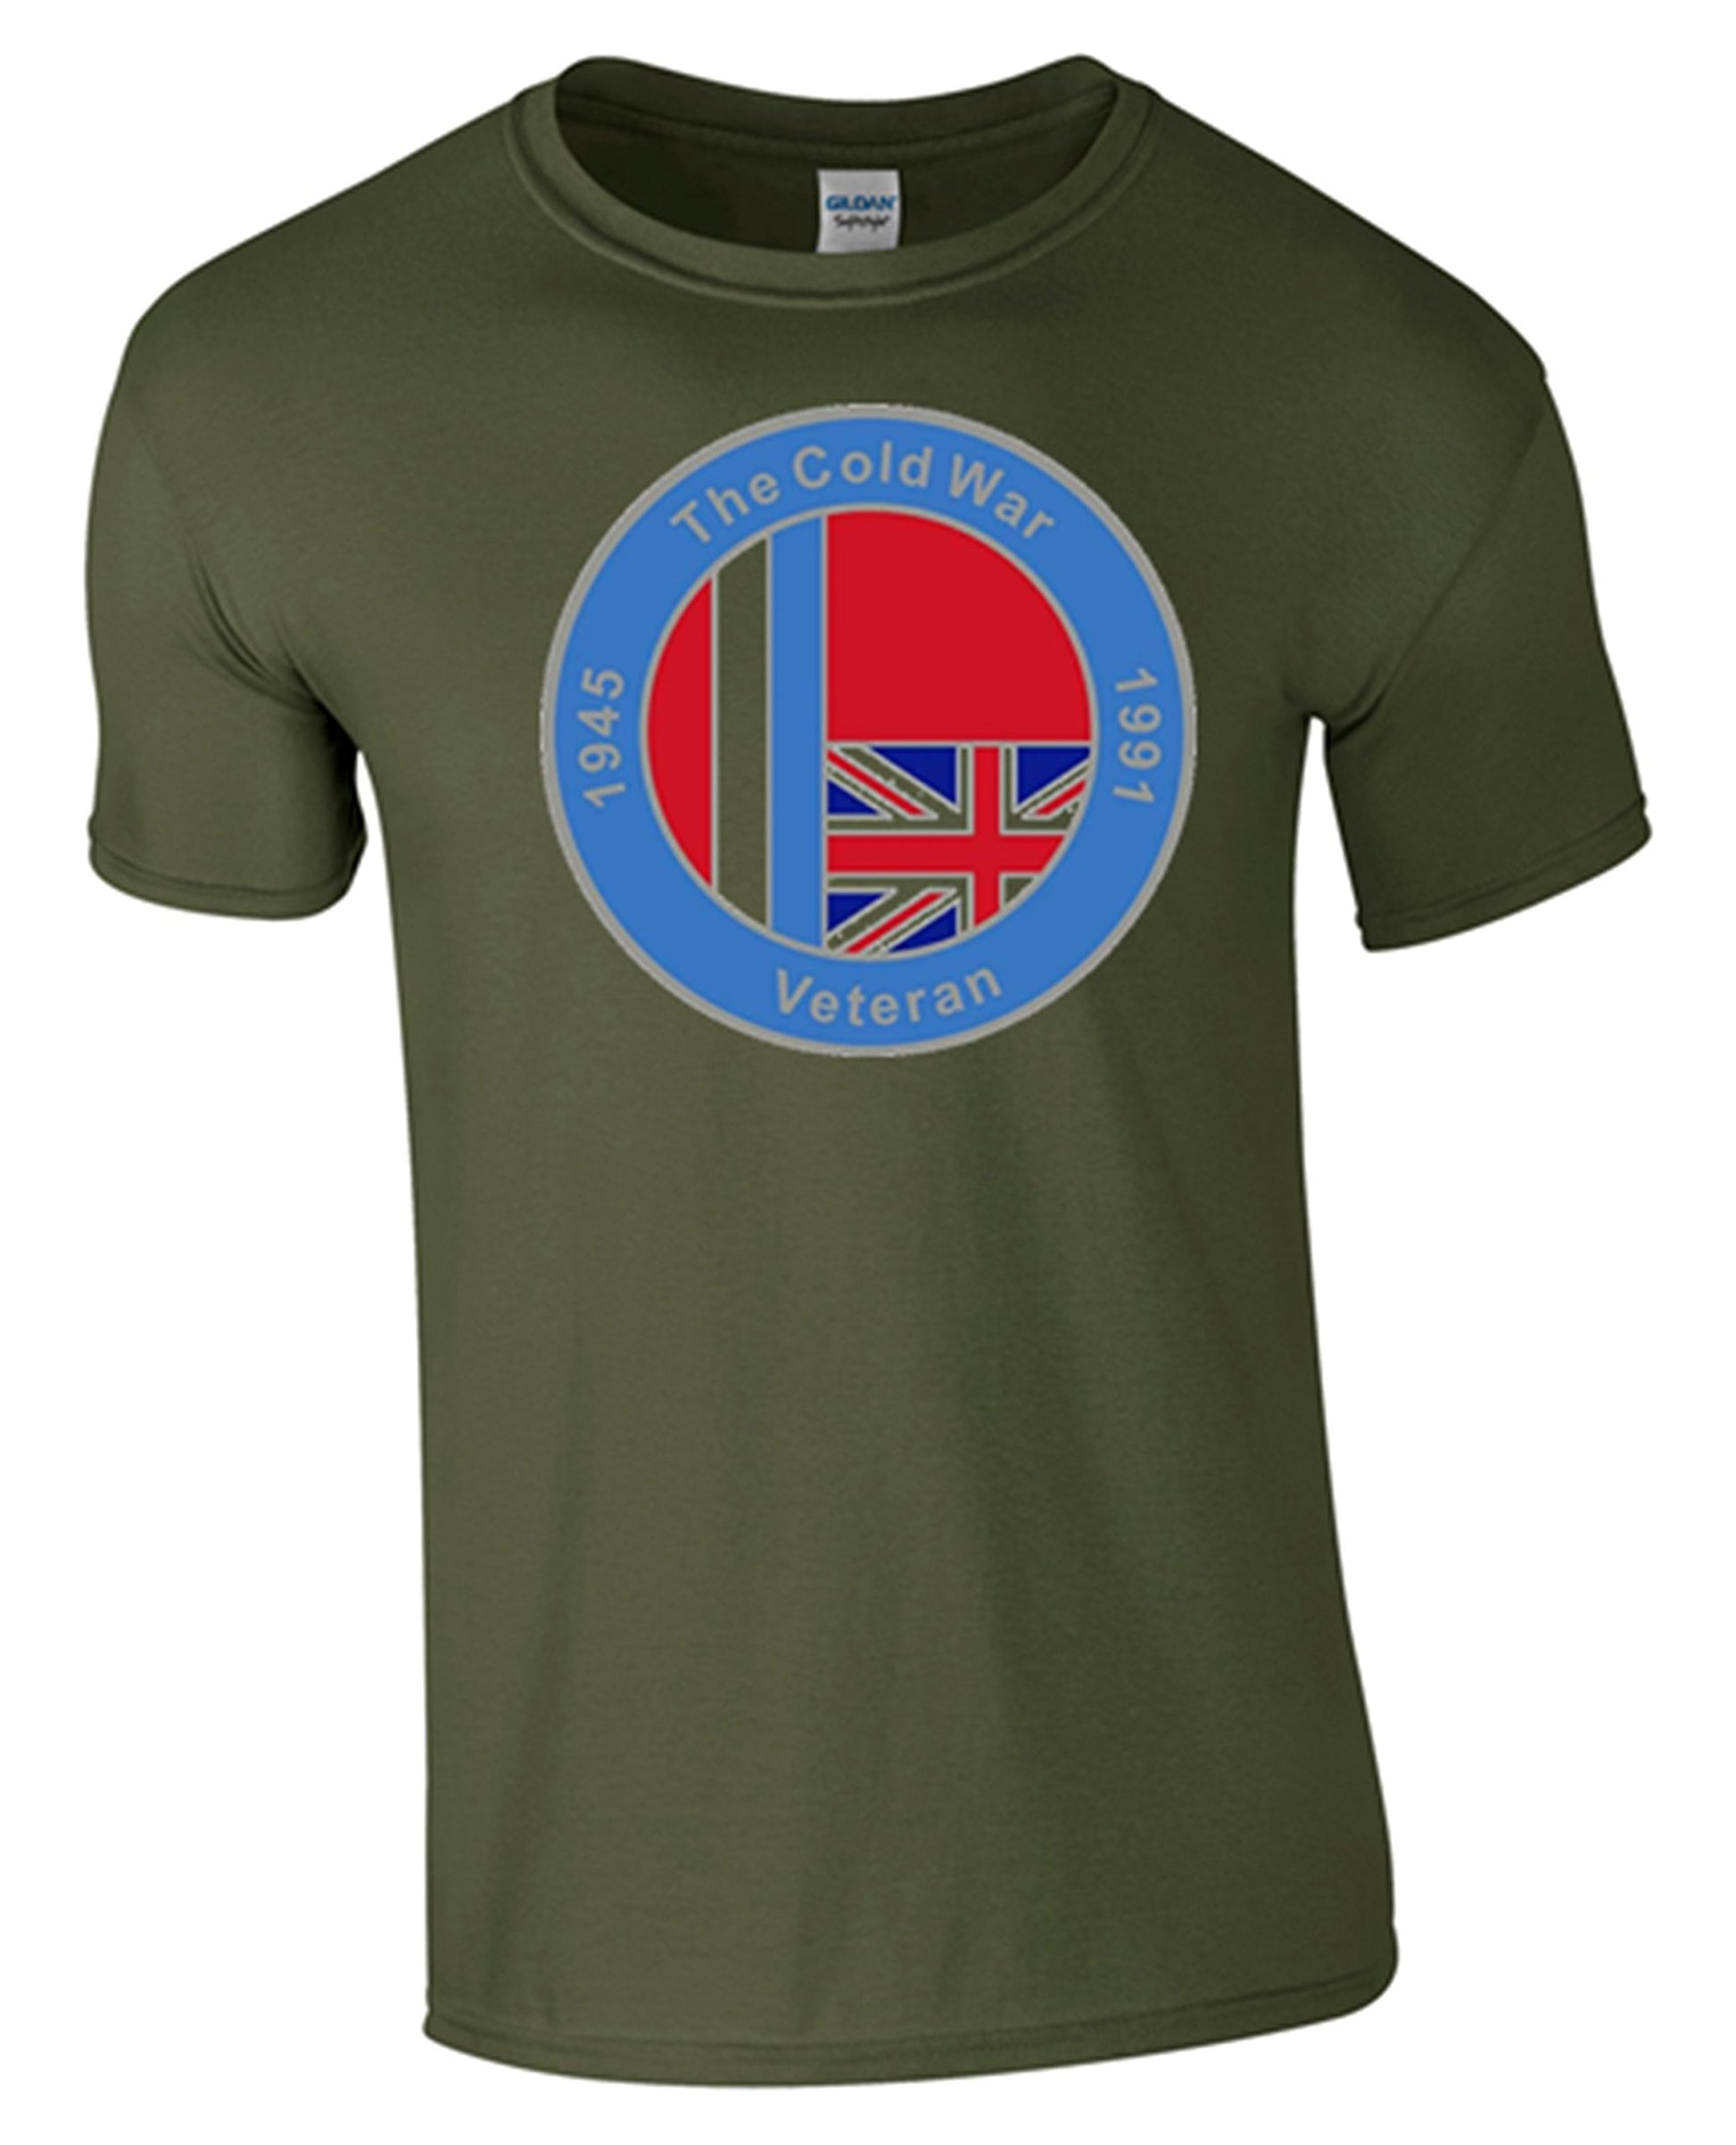 Bear Essentials Clothing. Cold War Op Banner T/Shirt (S, Green) - Army 1157 kit Army 1157 Kit